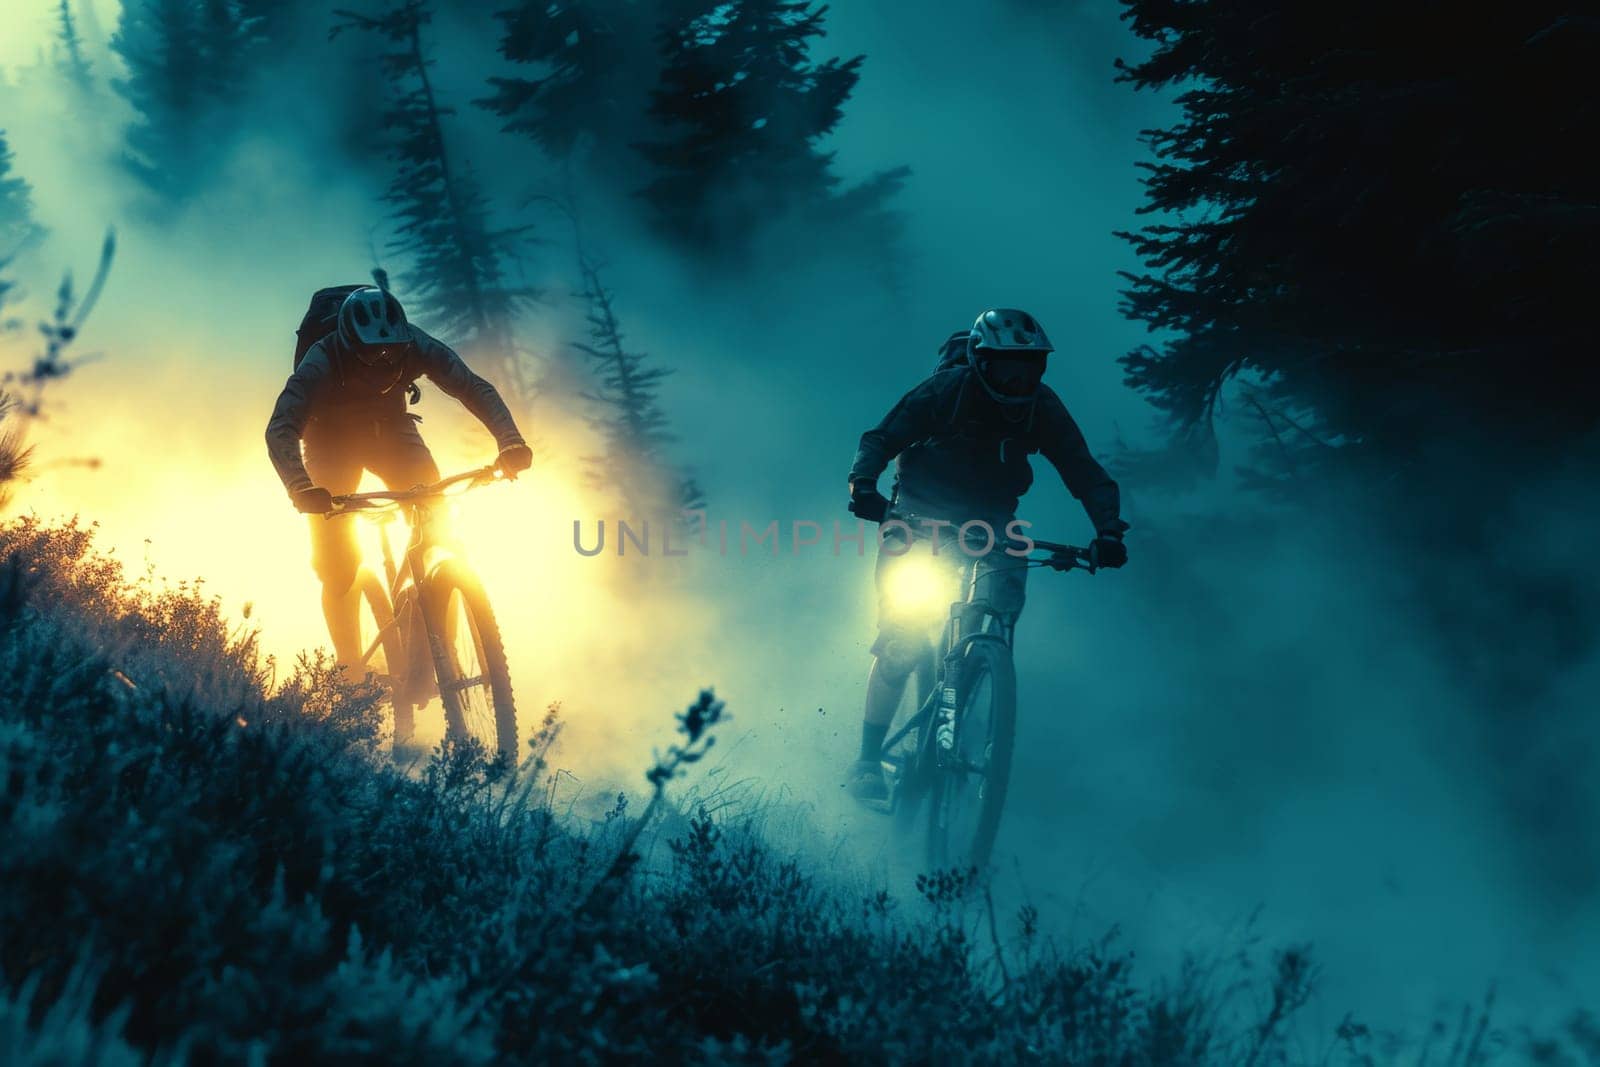 Two mountain bike riders at a mountain bike cross-country competition in the mountains by Lobachad